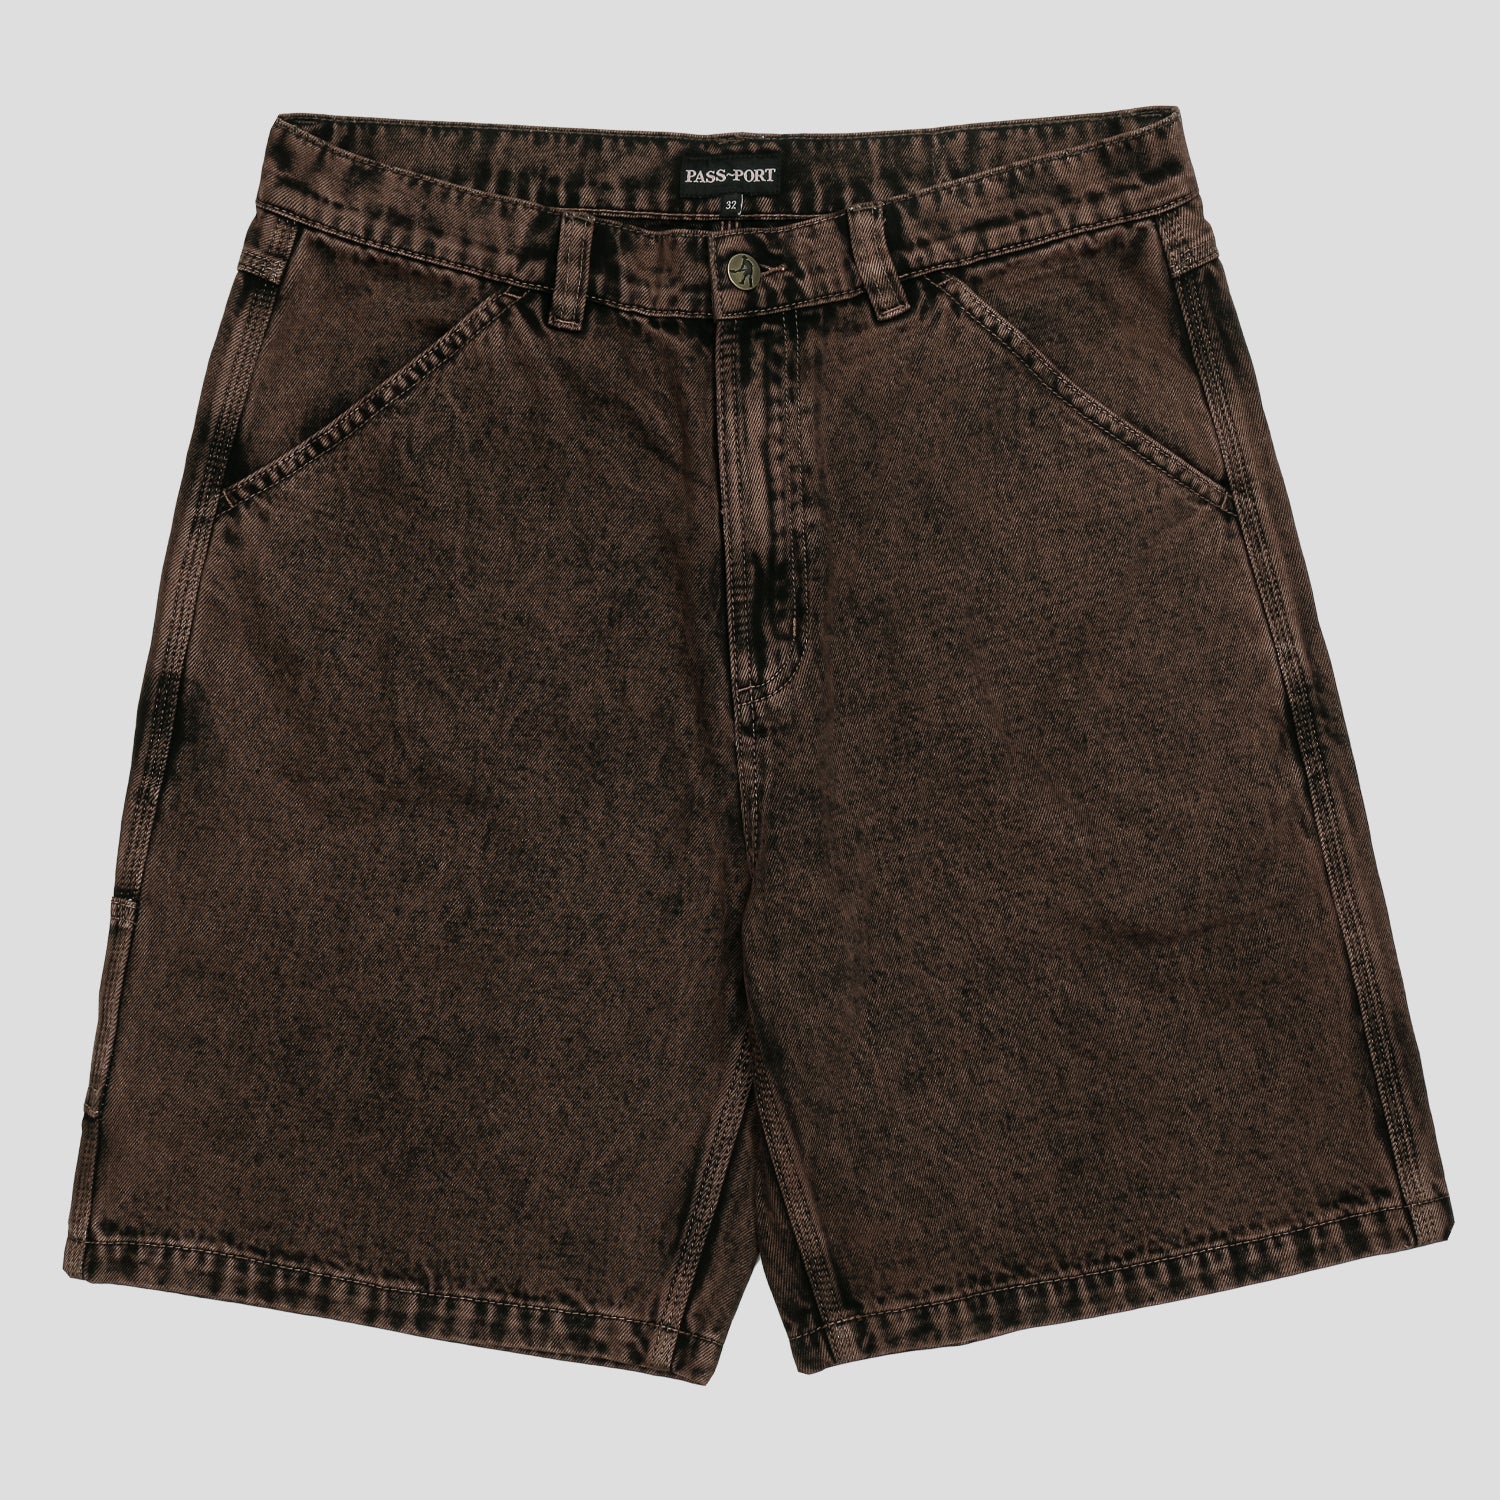 Workers Club Short (Over-Dye Brown)